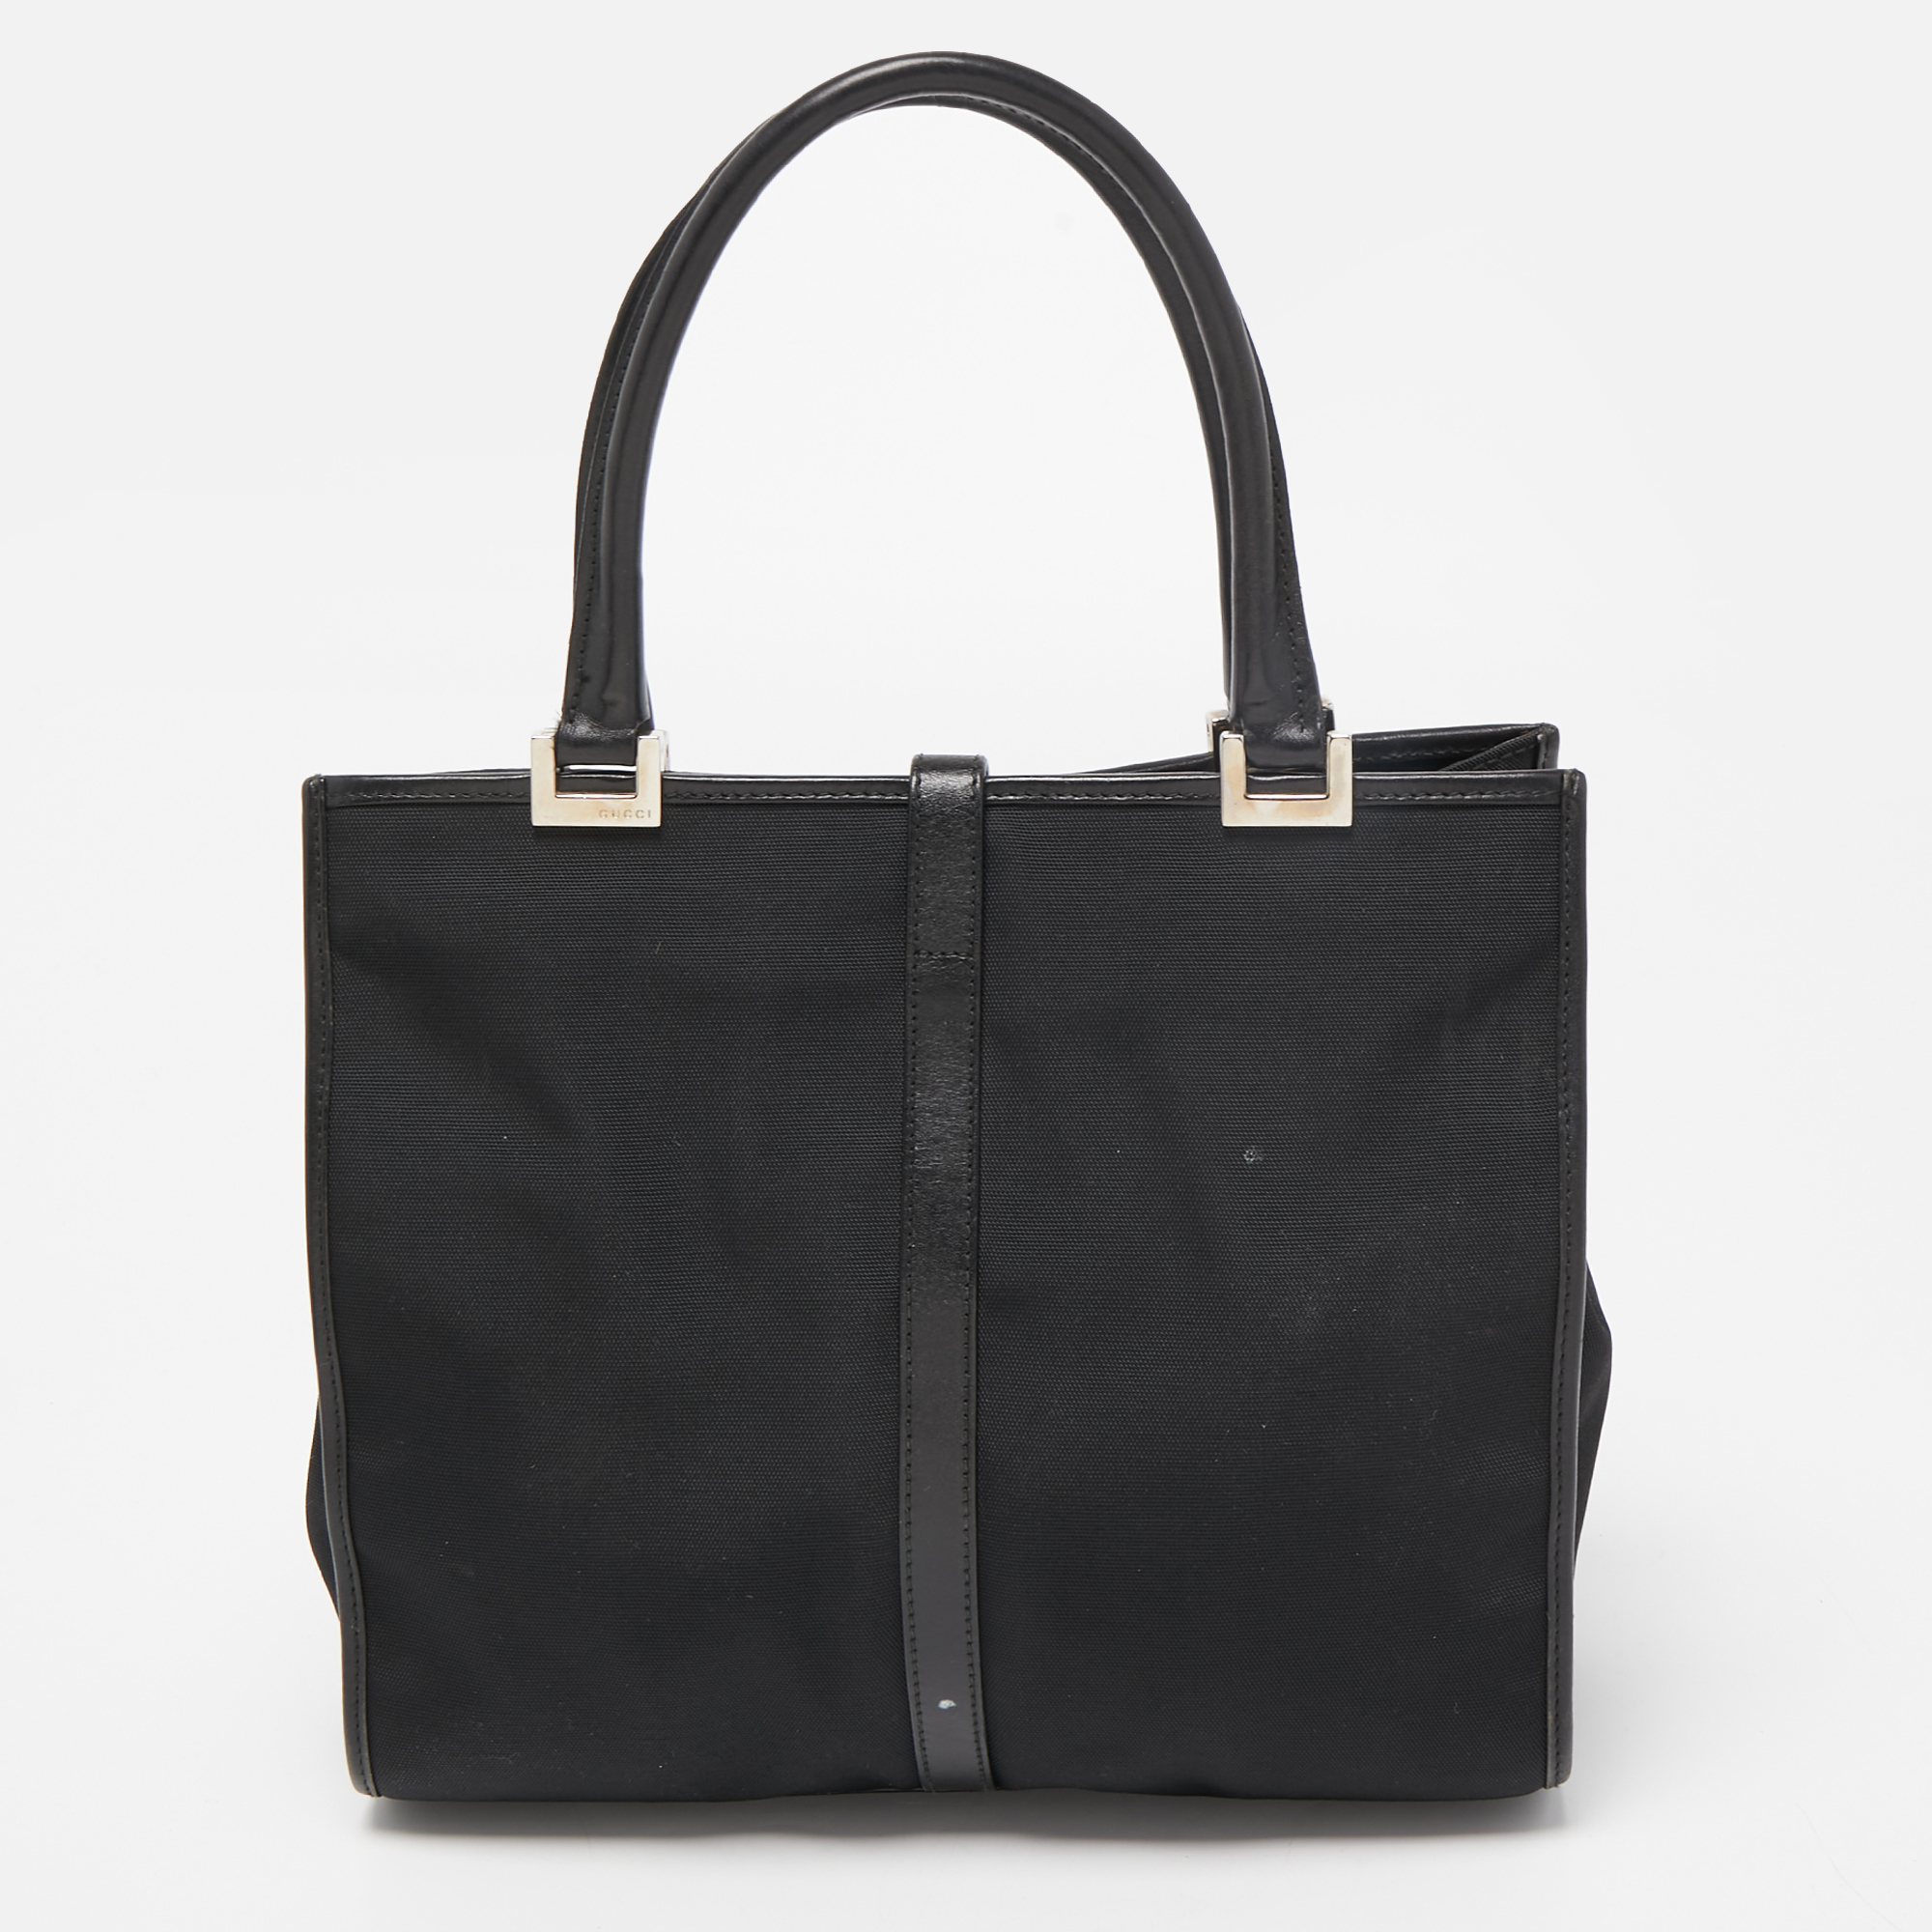 Gucci Black Nylon And Leather Jackie O Tote